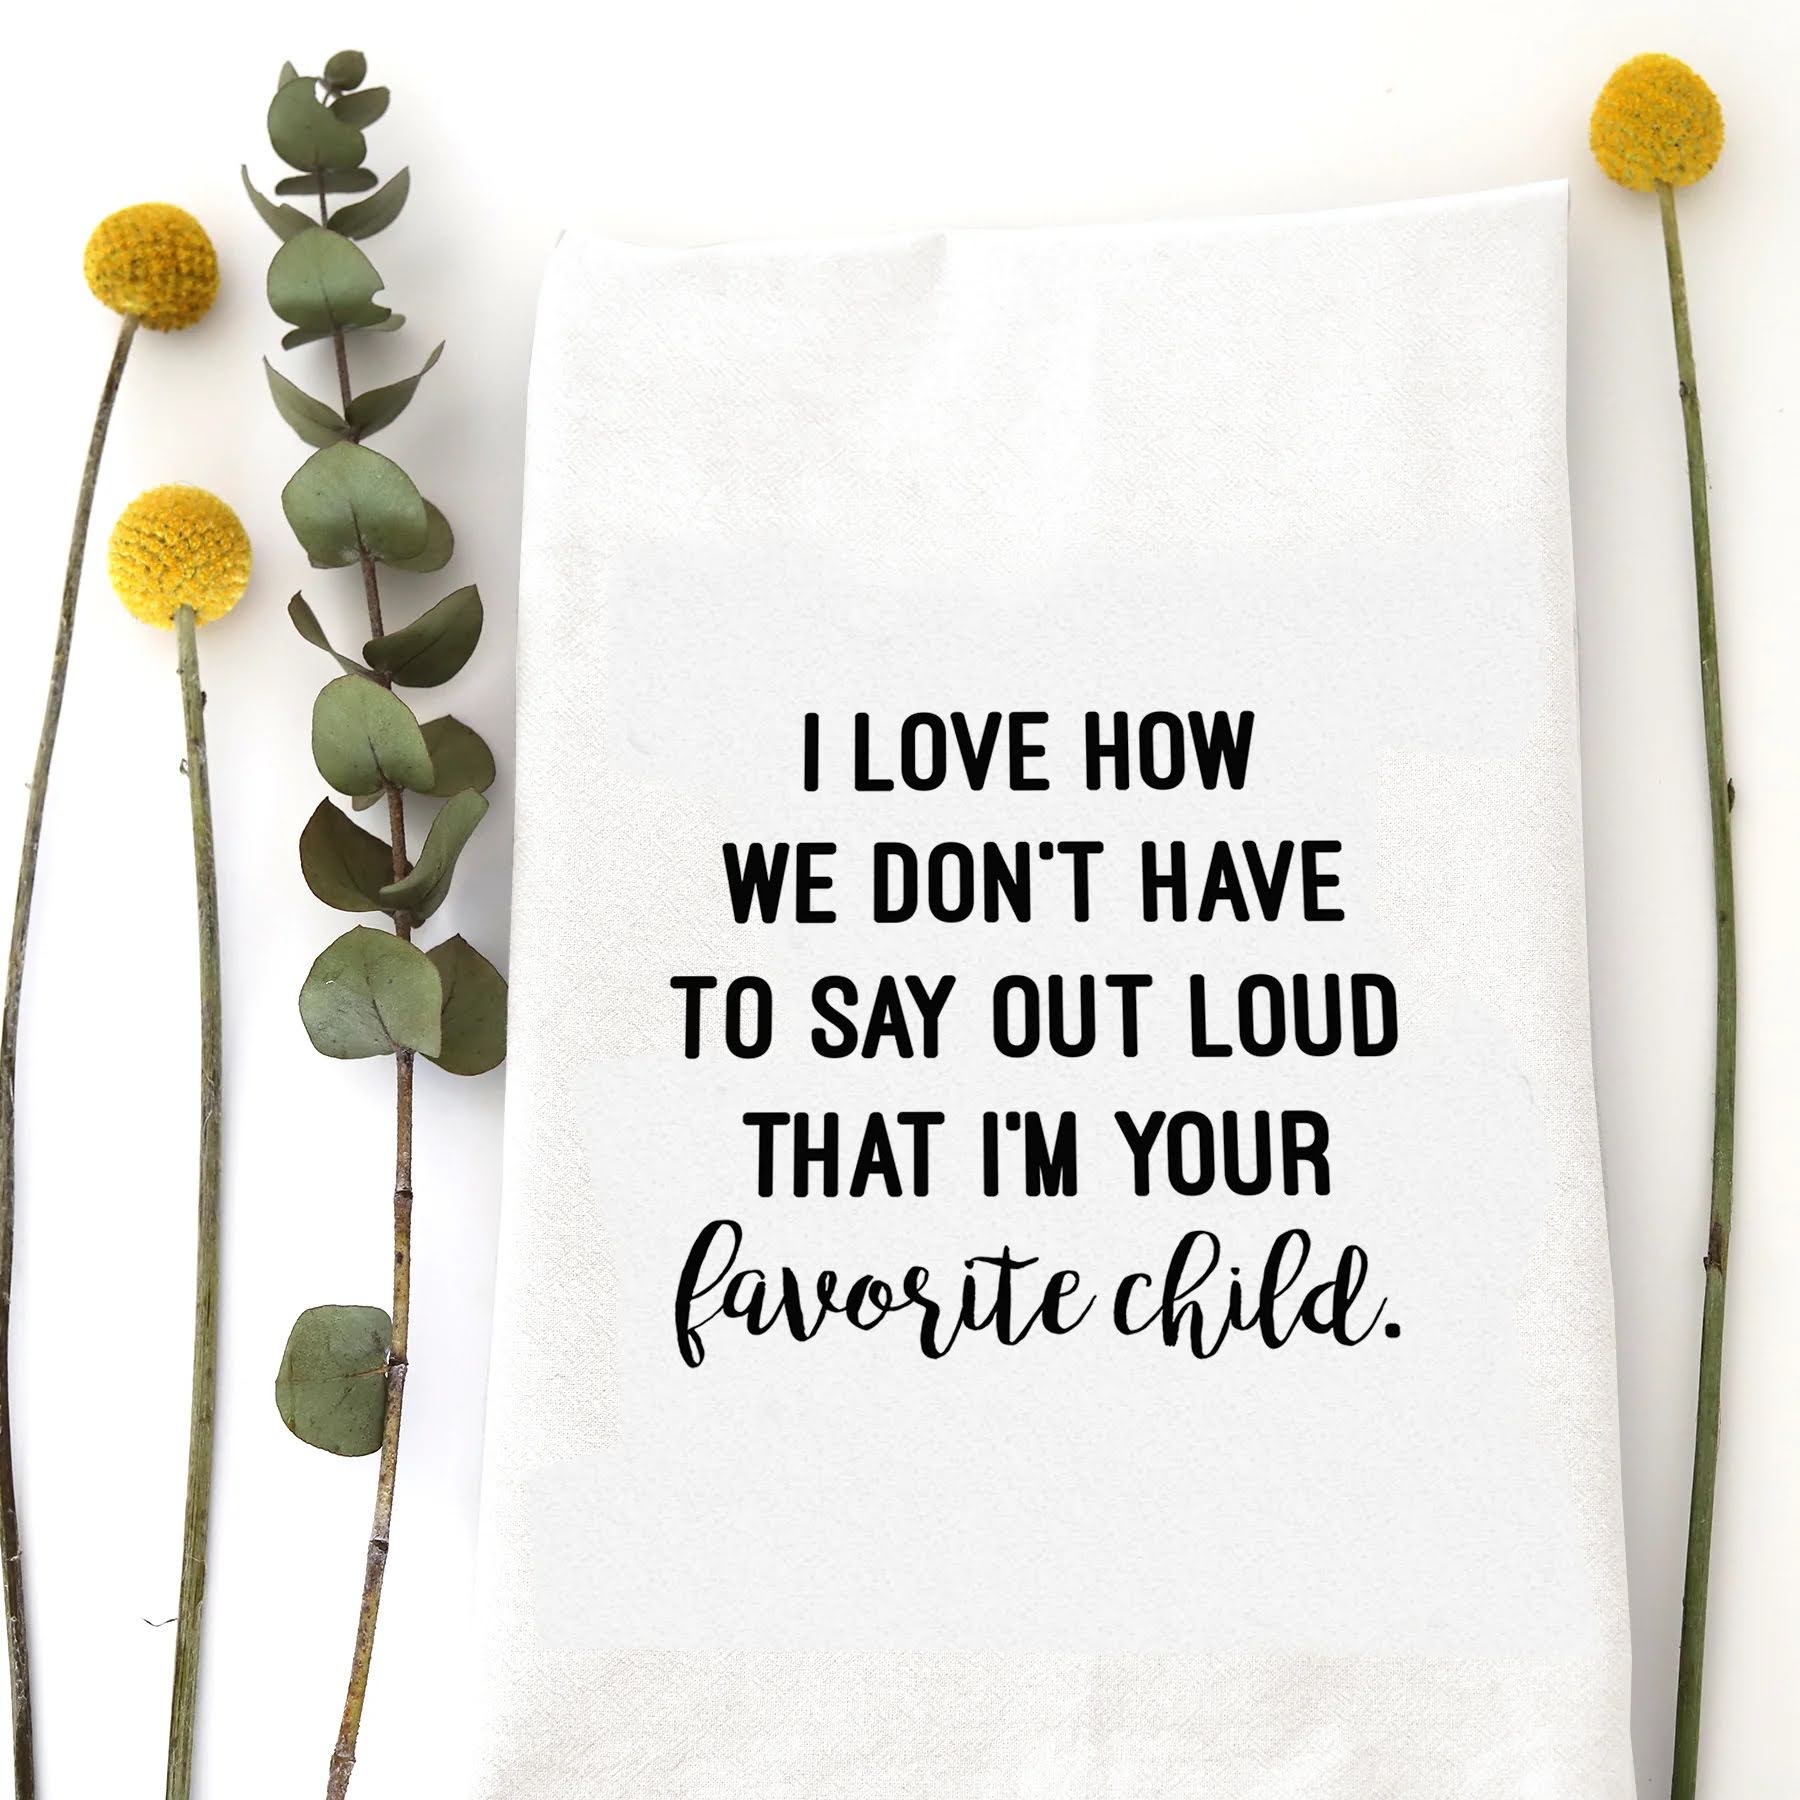 A tea towel with a funny saying - I love how we don't have to say out loud that I'm you favorite child.